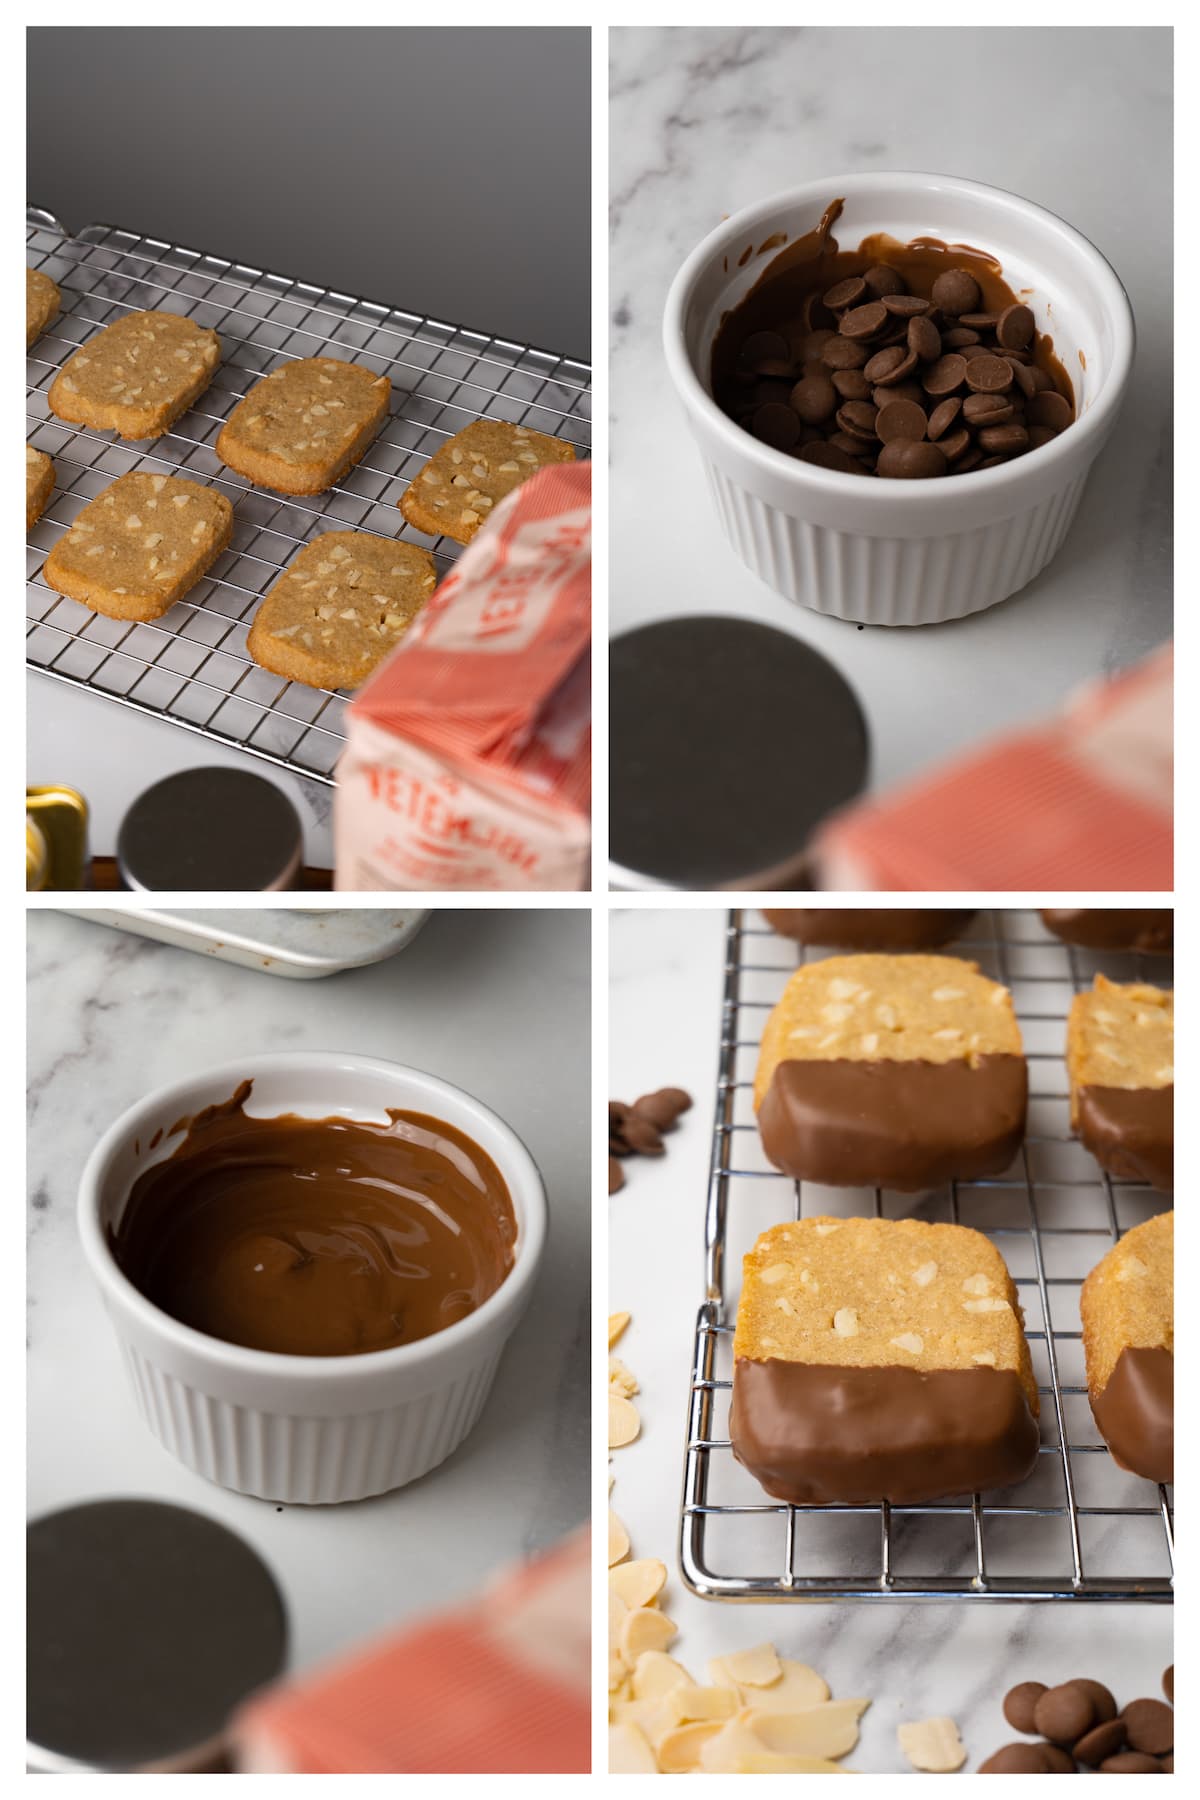 The collage image shows four steps to bake cookies with slivered almonds and cover them with chocolate glaze.